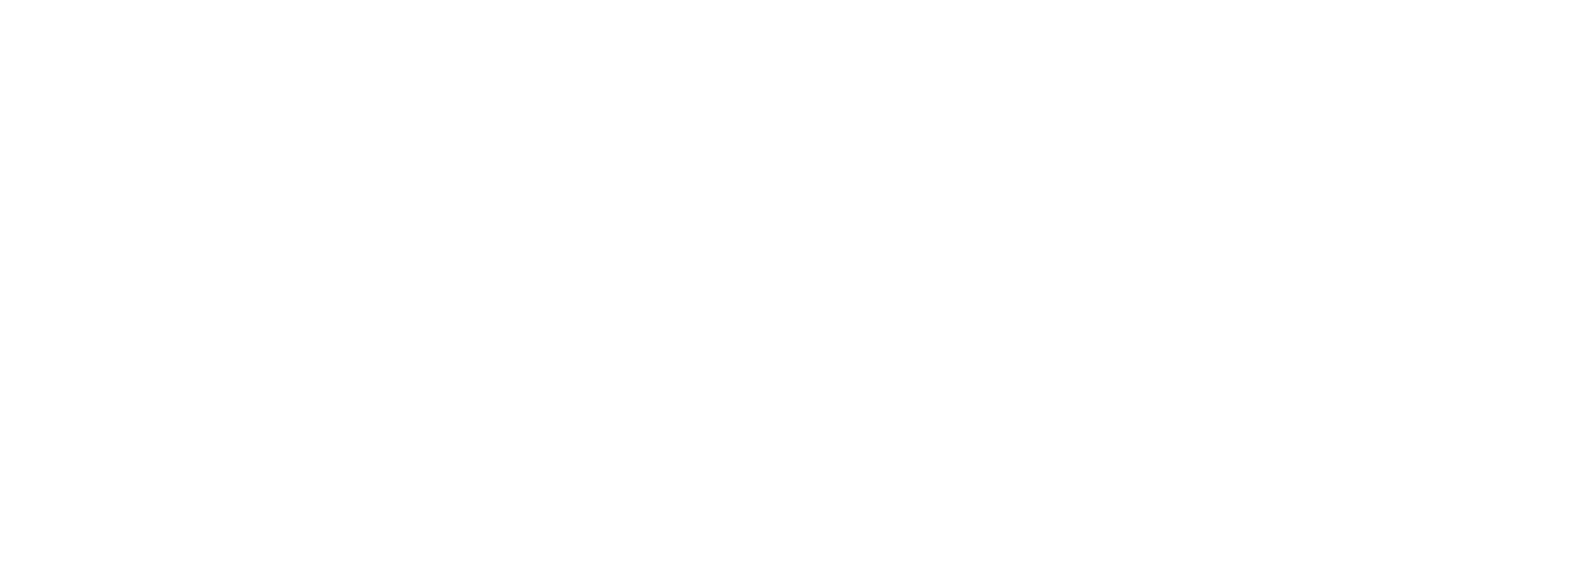 Udaan :: The Travel Experts